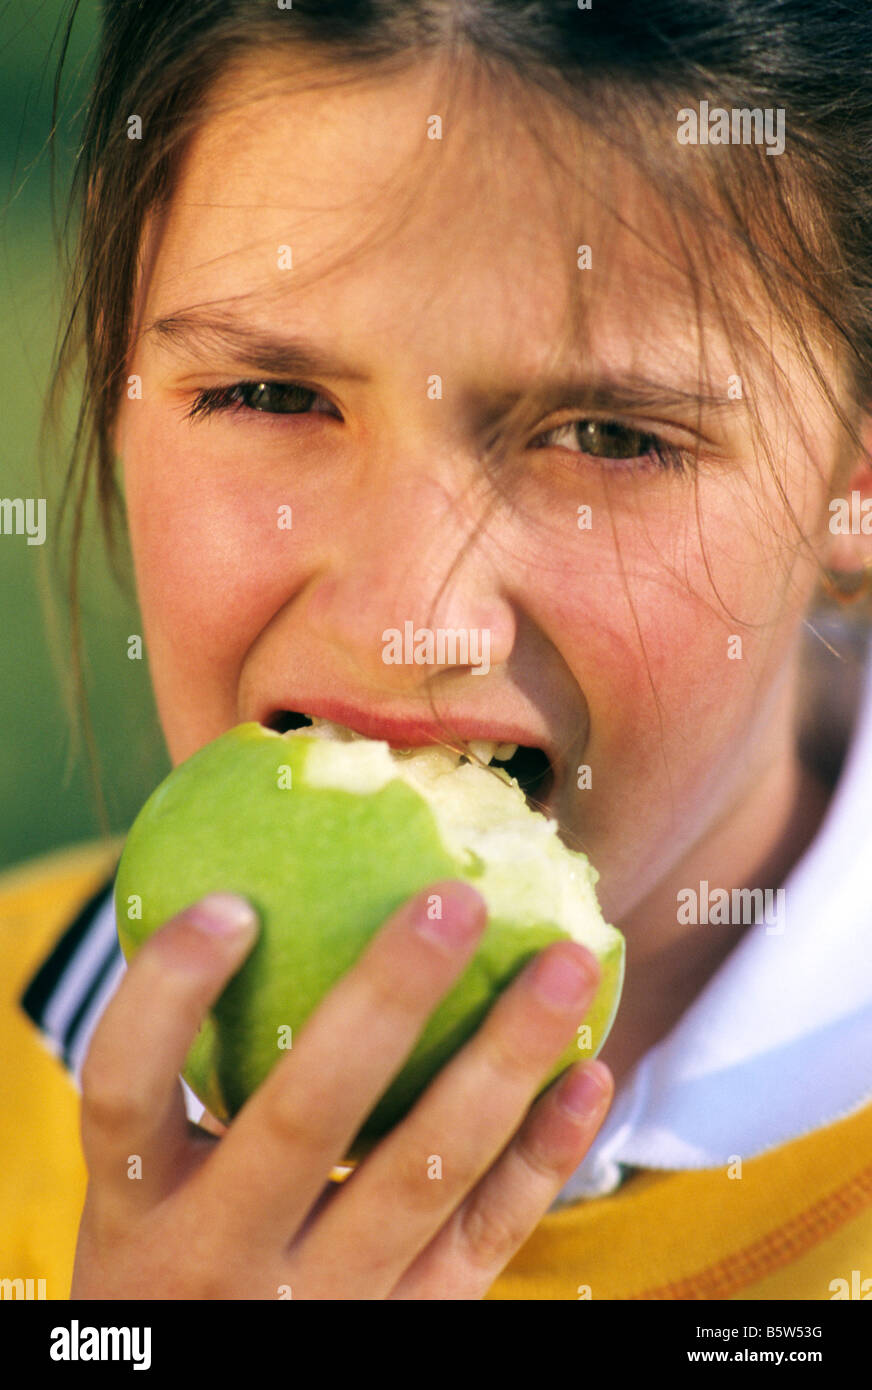 Young girl child eating an apple Stock Photo